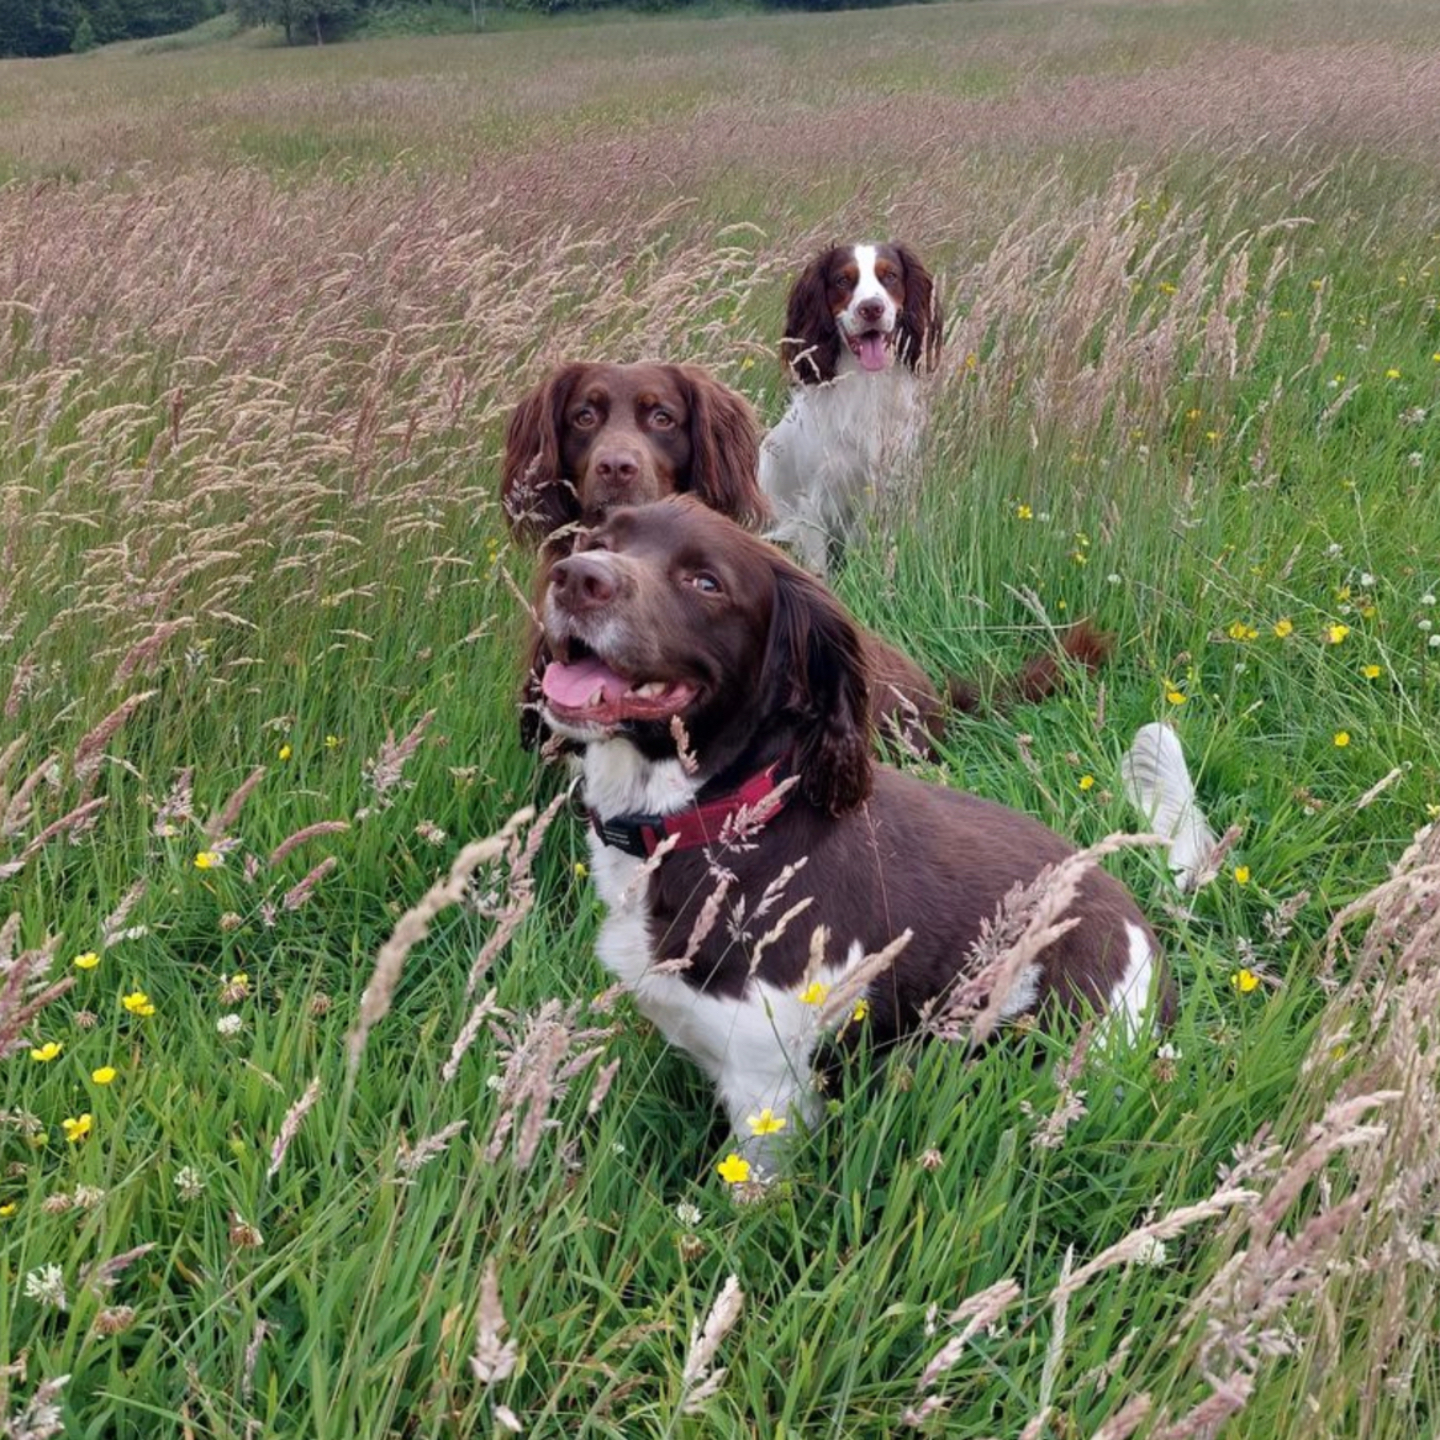 Three dogs enjoining their time in the field